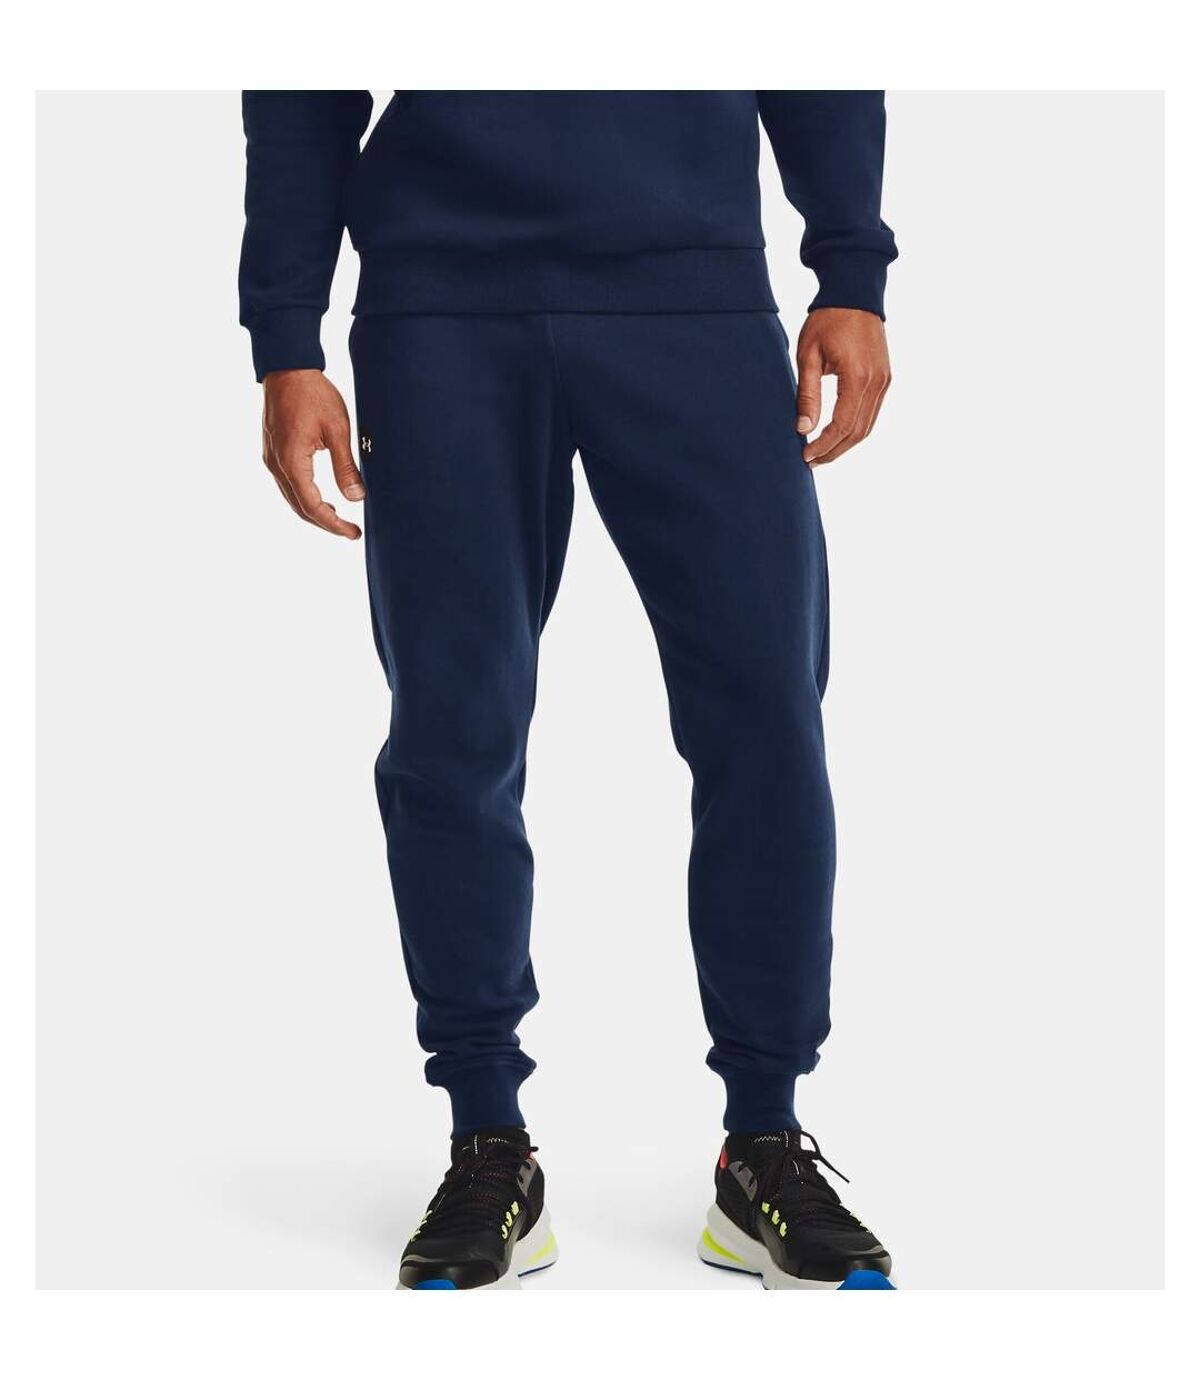 Under Armour Mens Rival Jogging Bottoms (Academy Blue/Onyx White) - UTRW7807